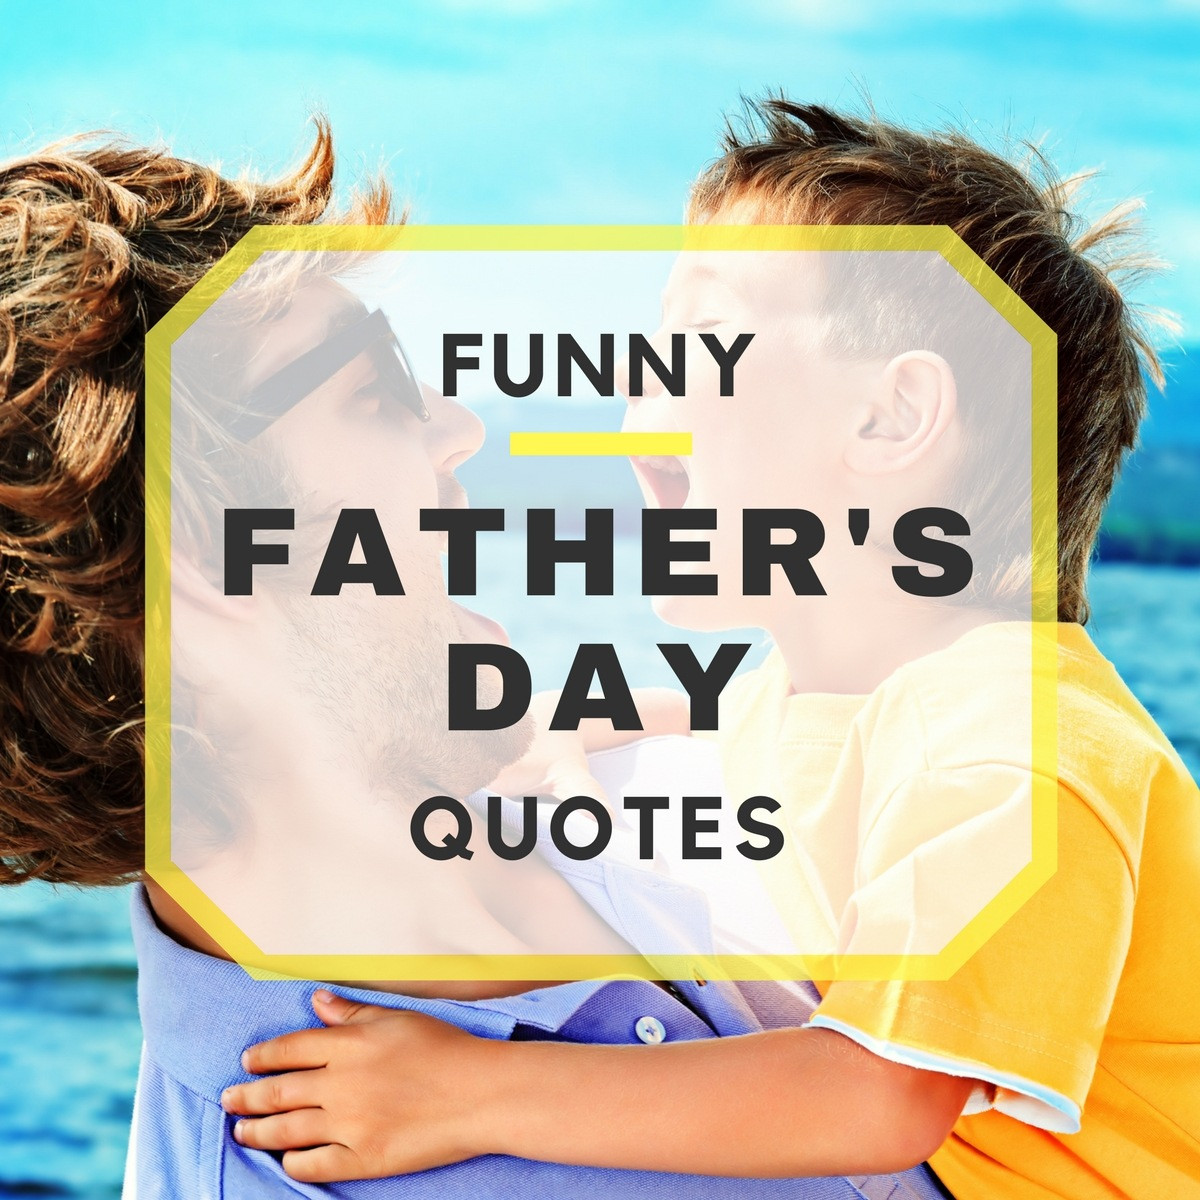 Fun Fathers Day Quotes
 20 Funny Father s Day Quotes